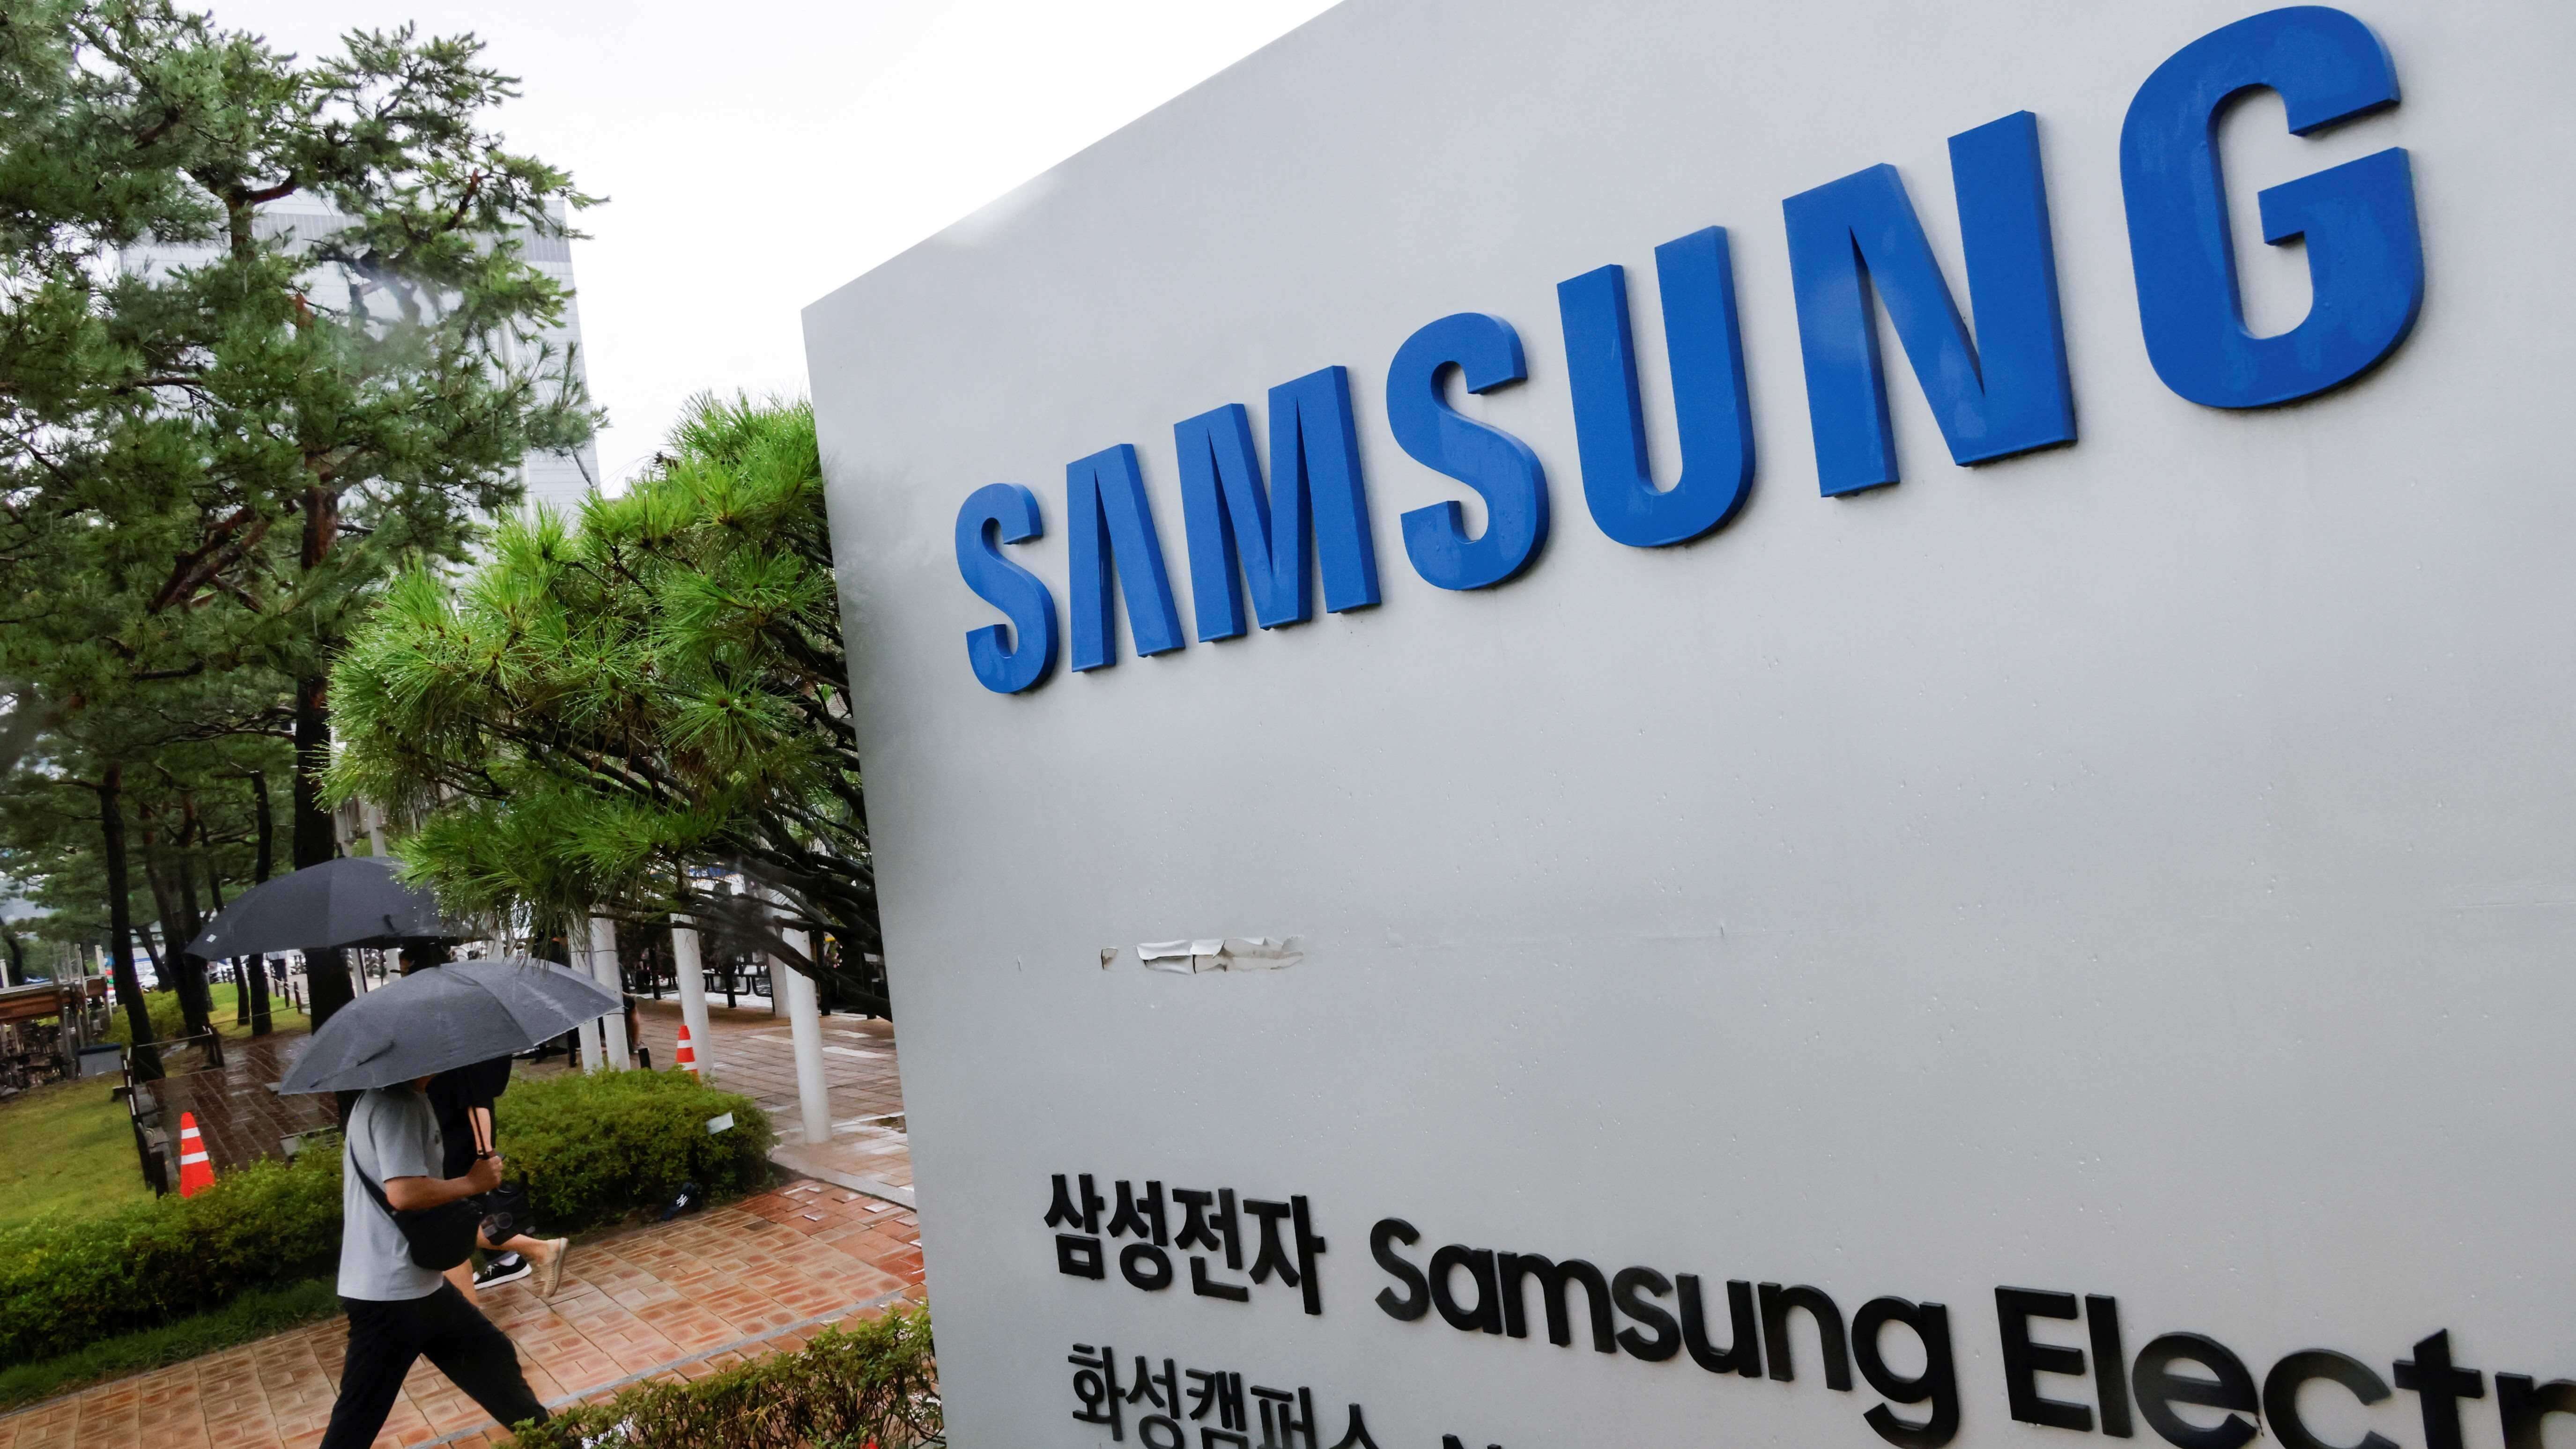 Samsung Agrees To Acquire British Startup Oxford Semantic For AI